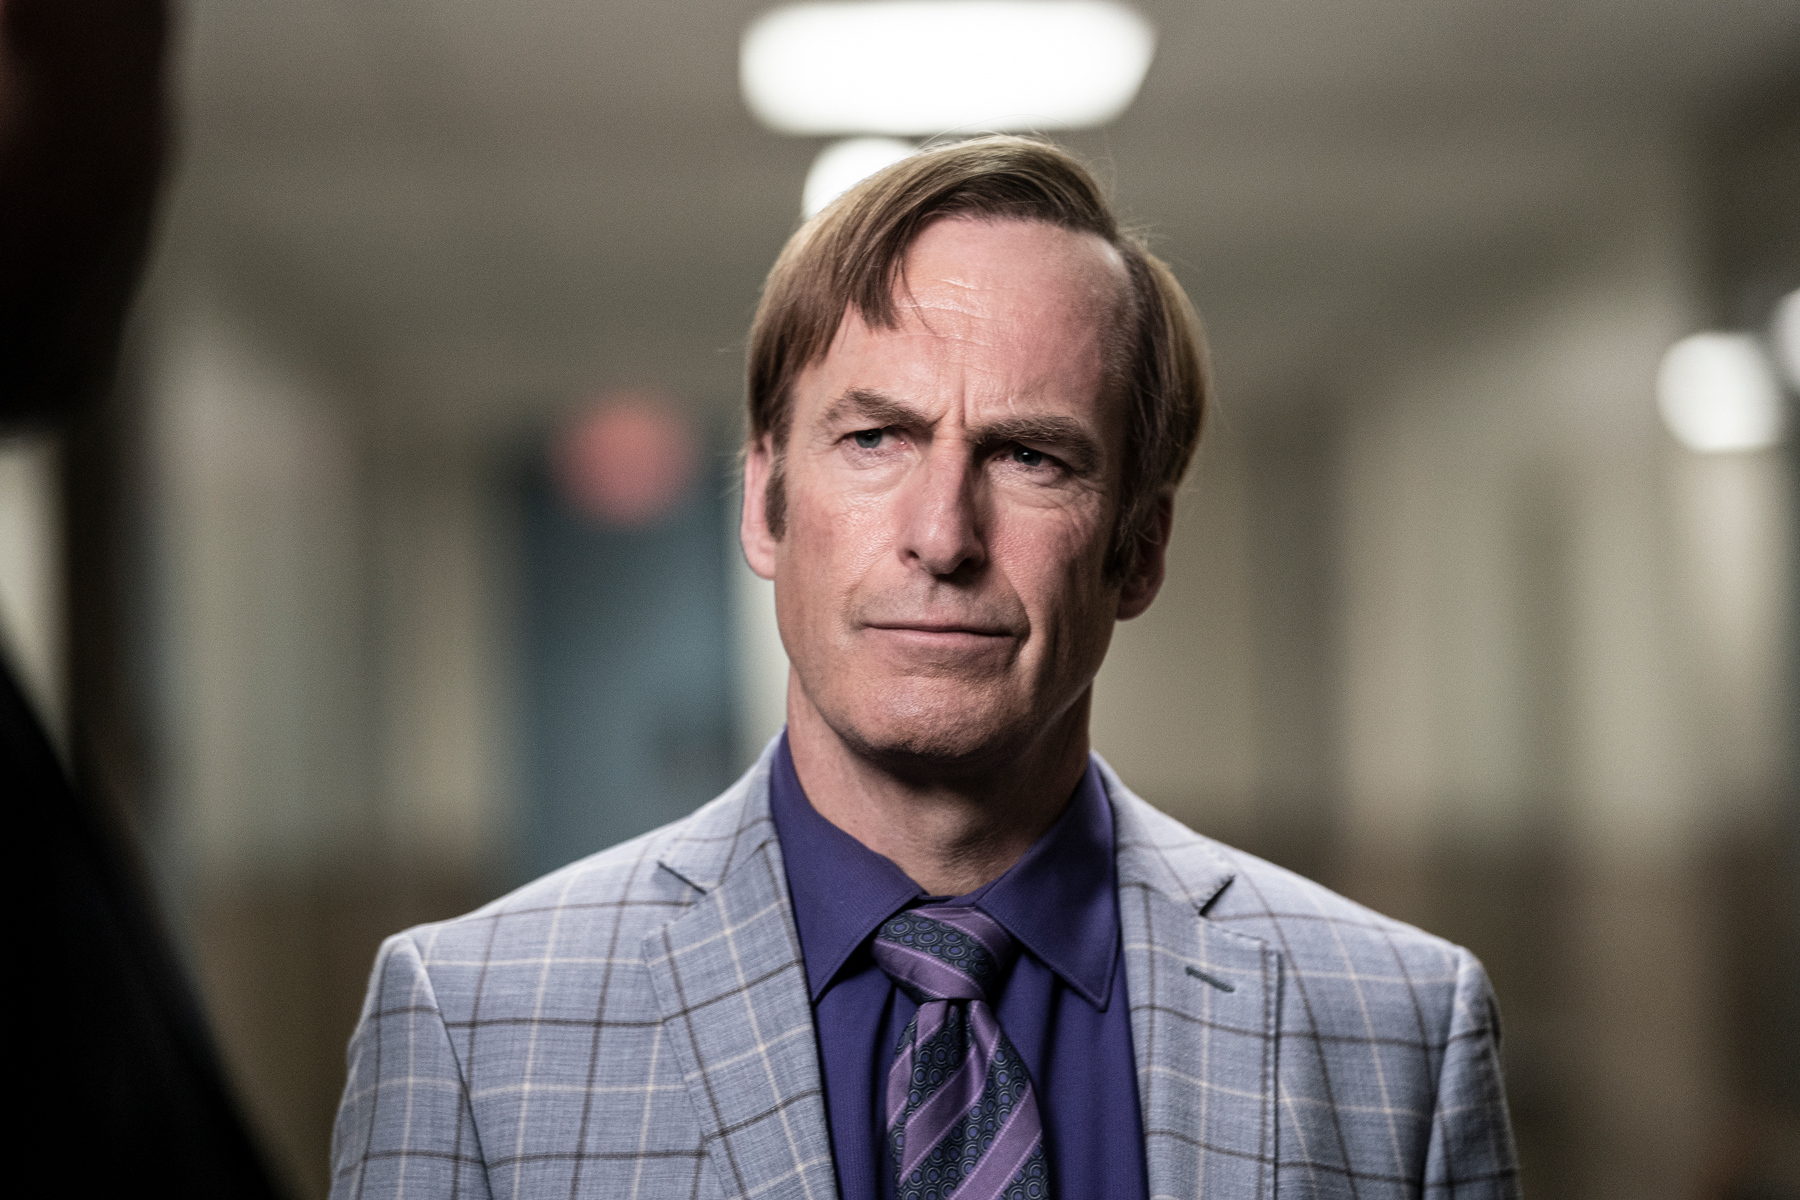 What you need to know before the end of “Better Call Saul”